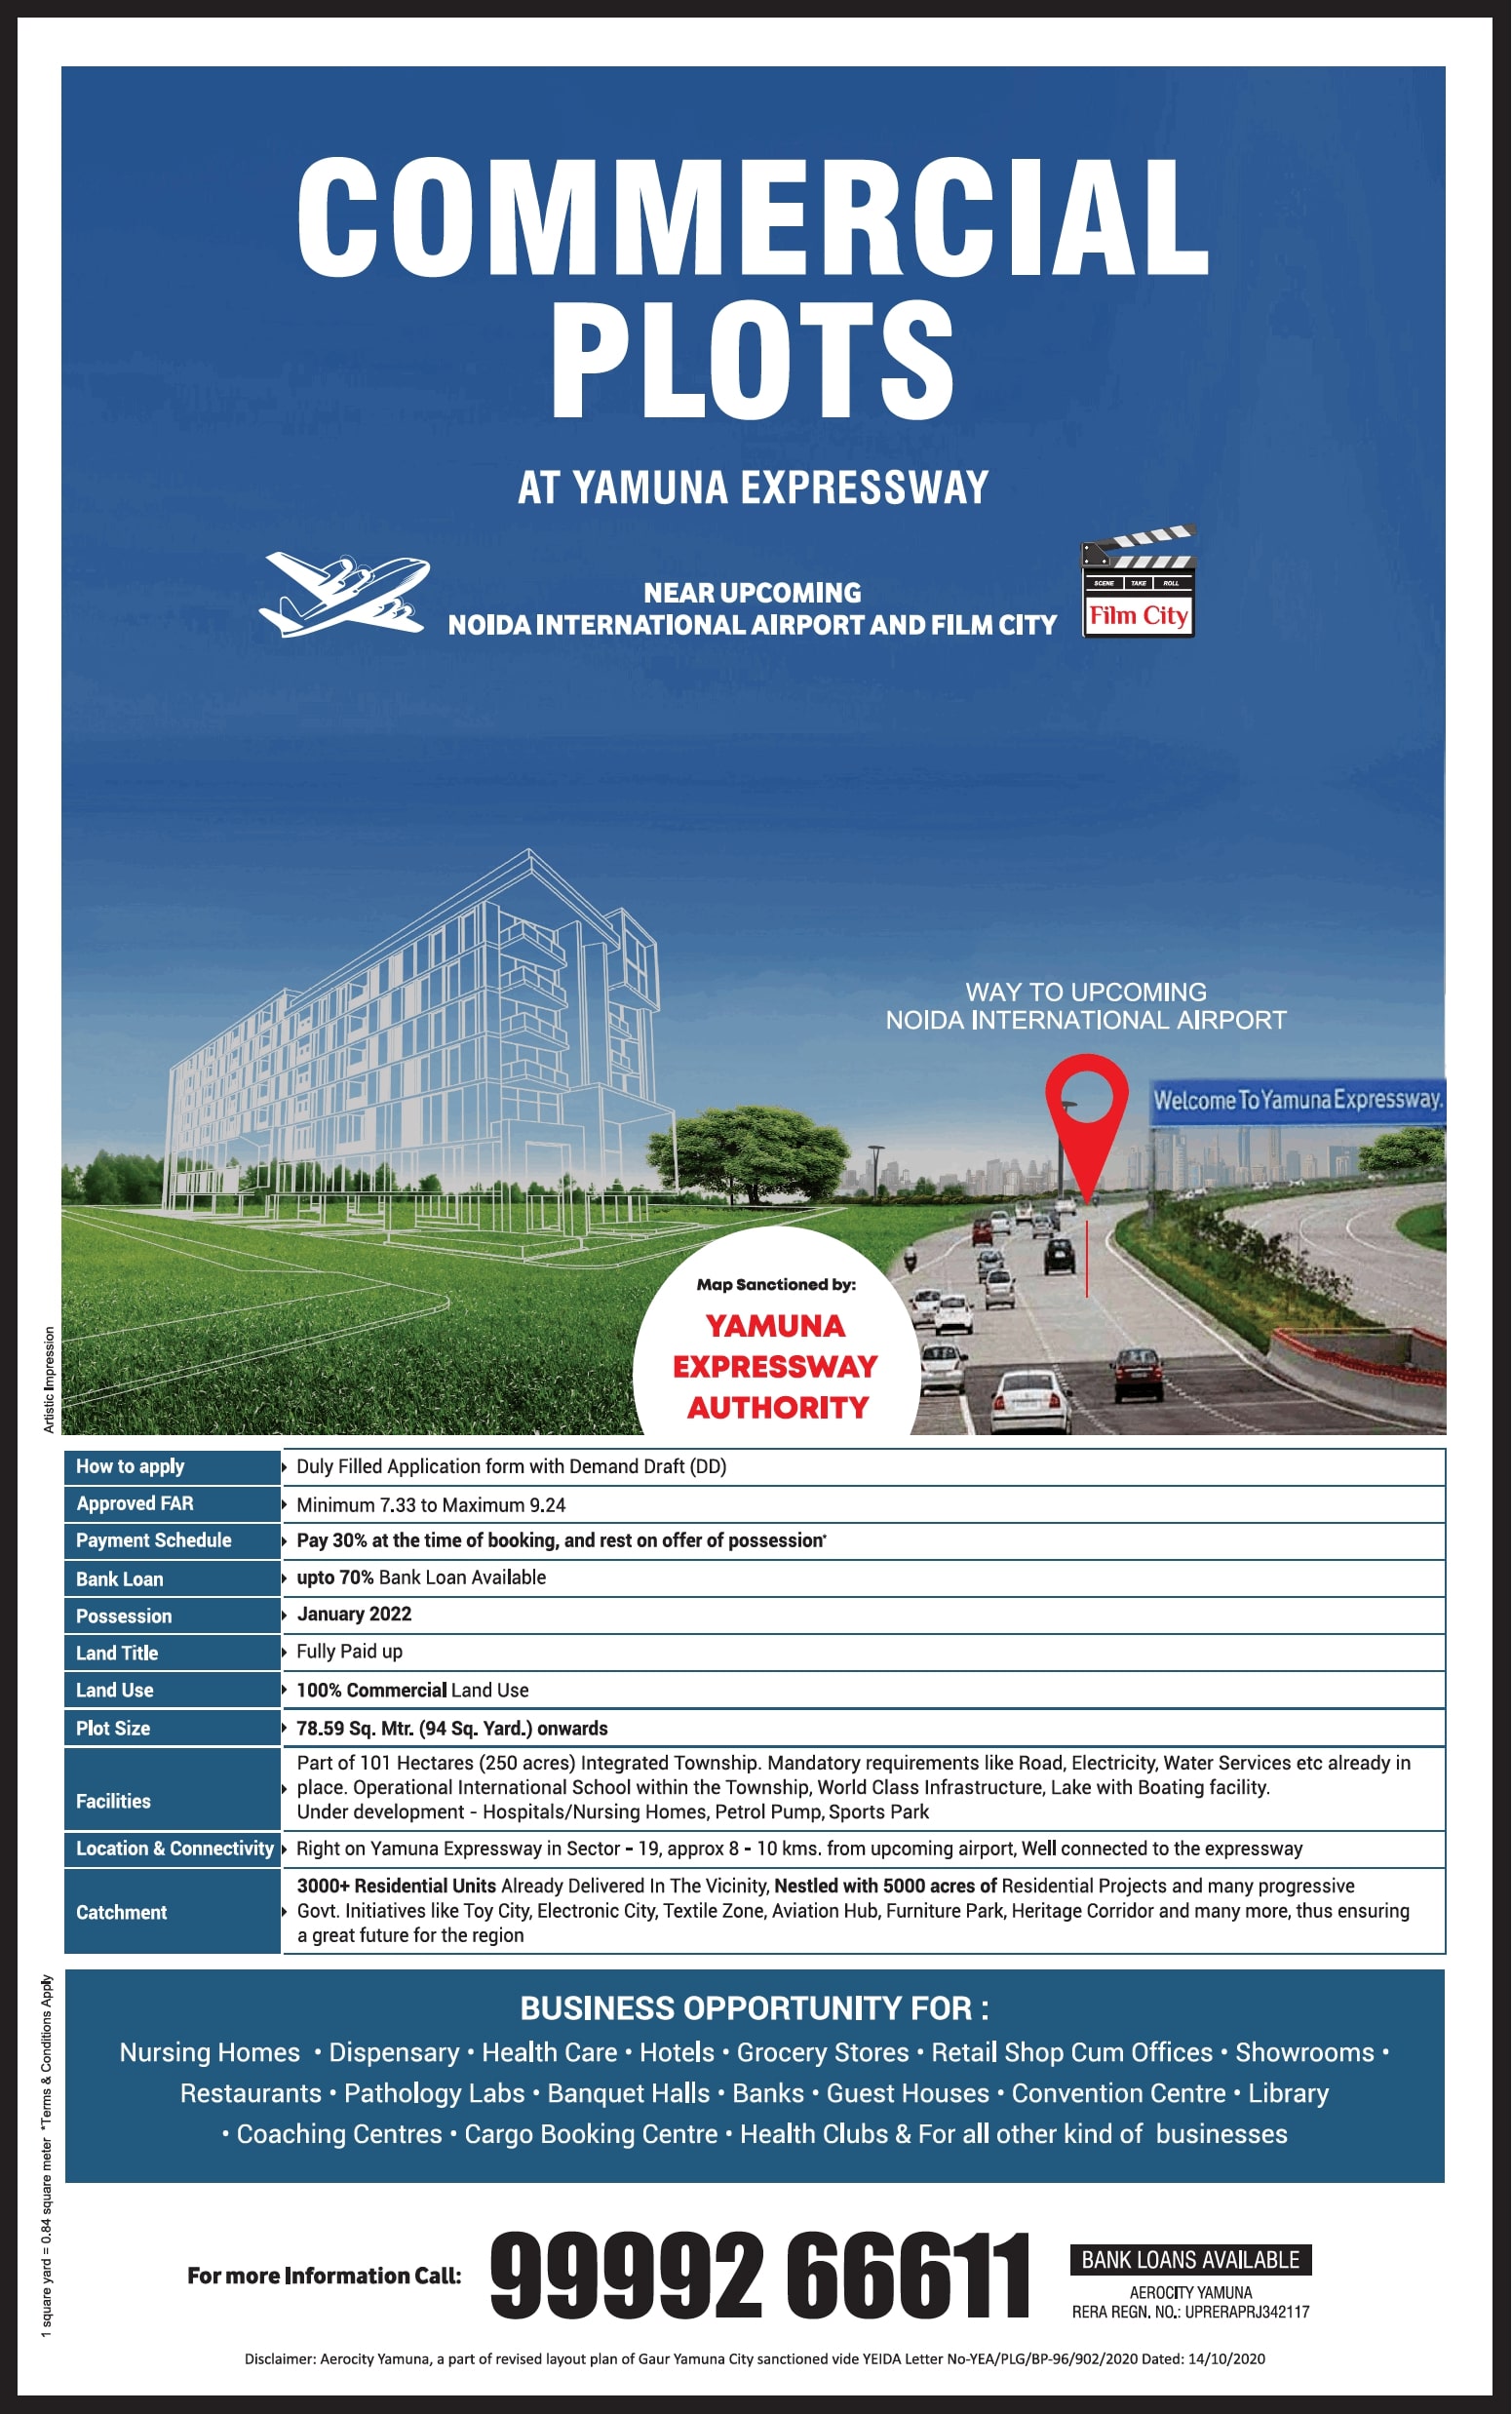 yamuna-expressway-authority-commercial-plots--delhi-times-20-03-2021